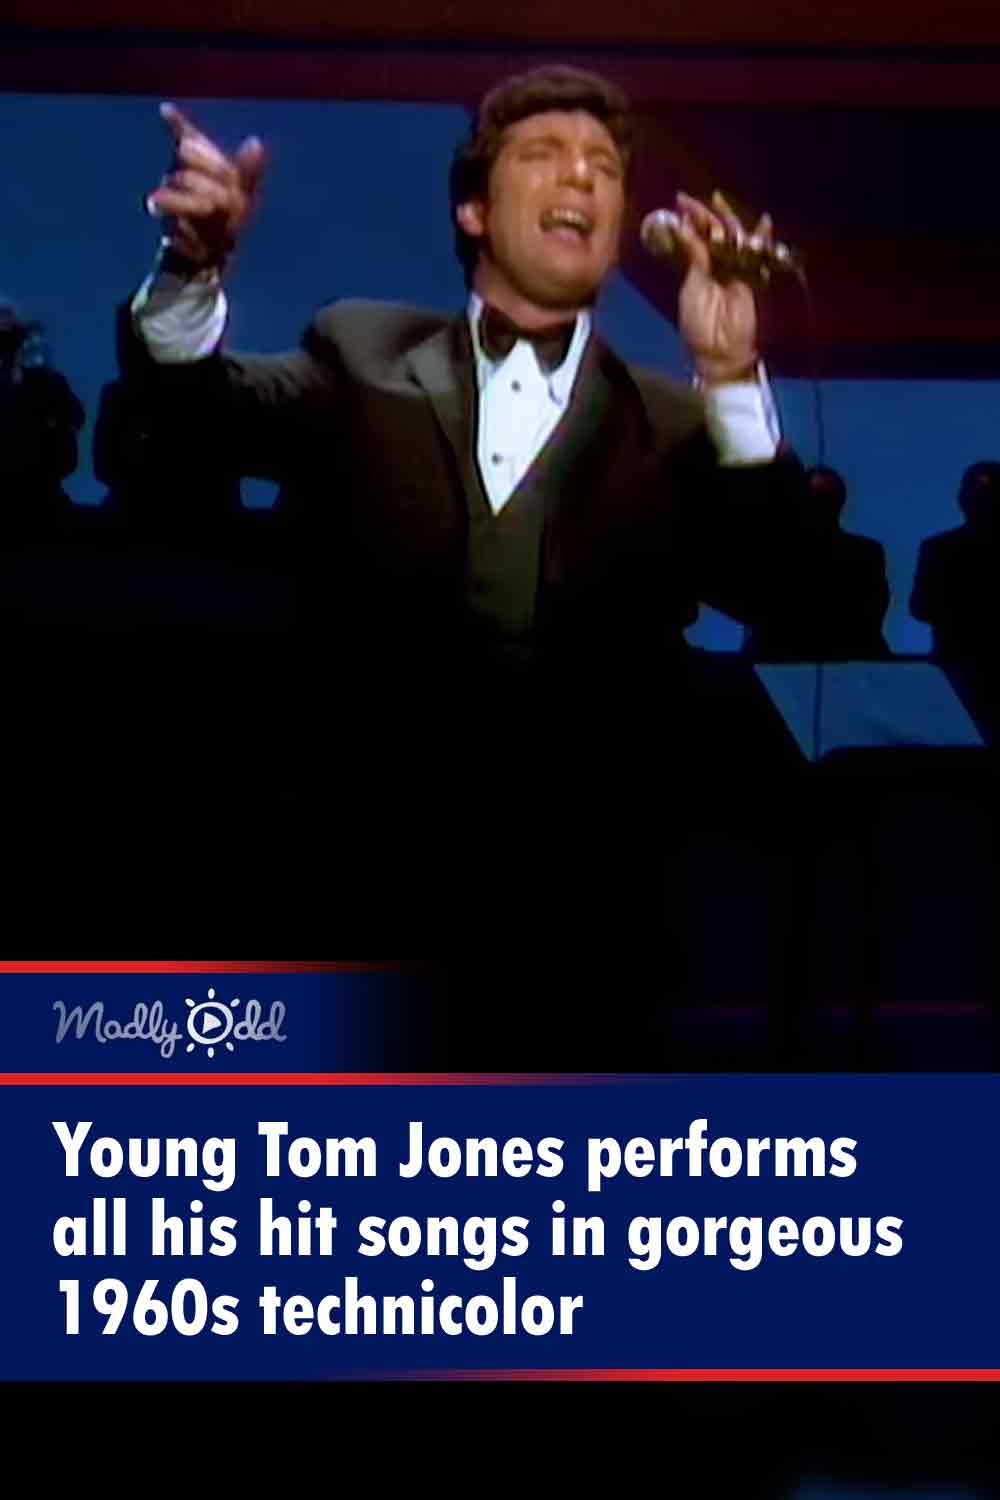 Young Tom Jones performs all his hit songs in gorgeous 1960s technicolor